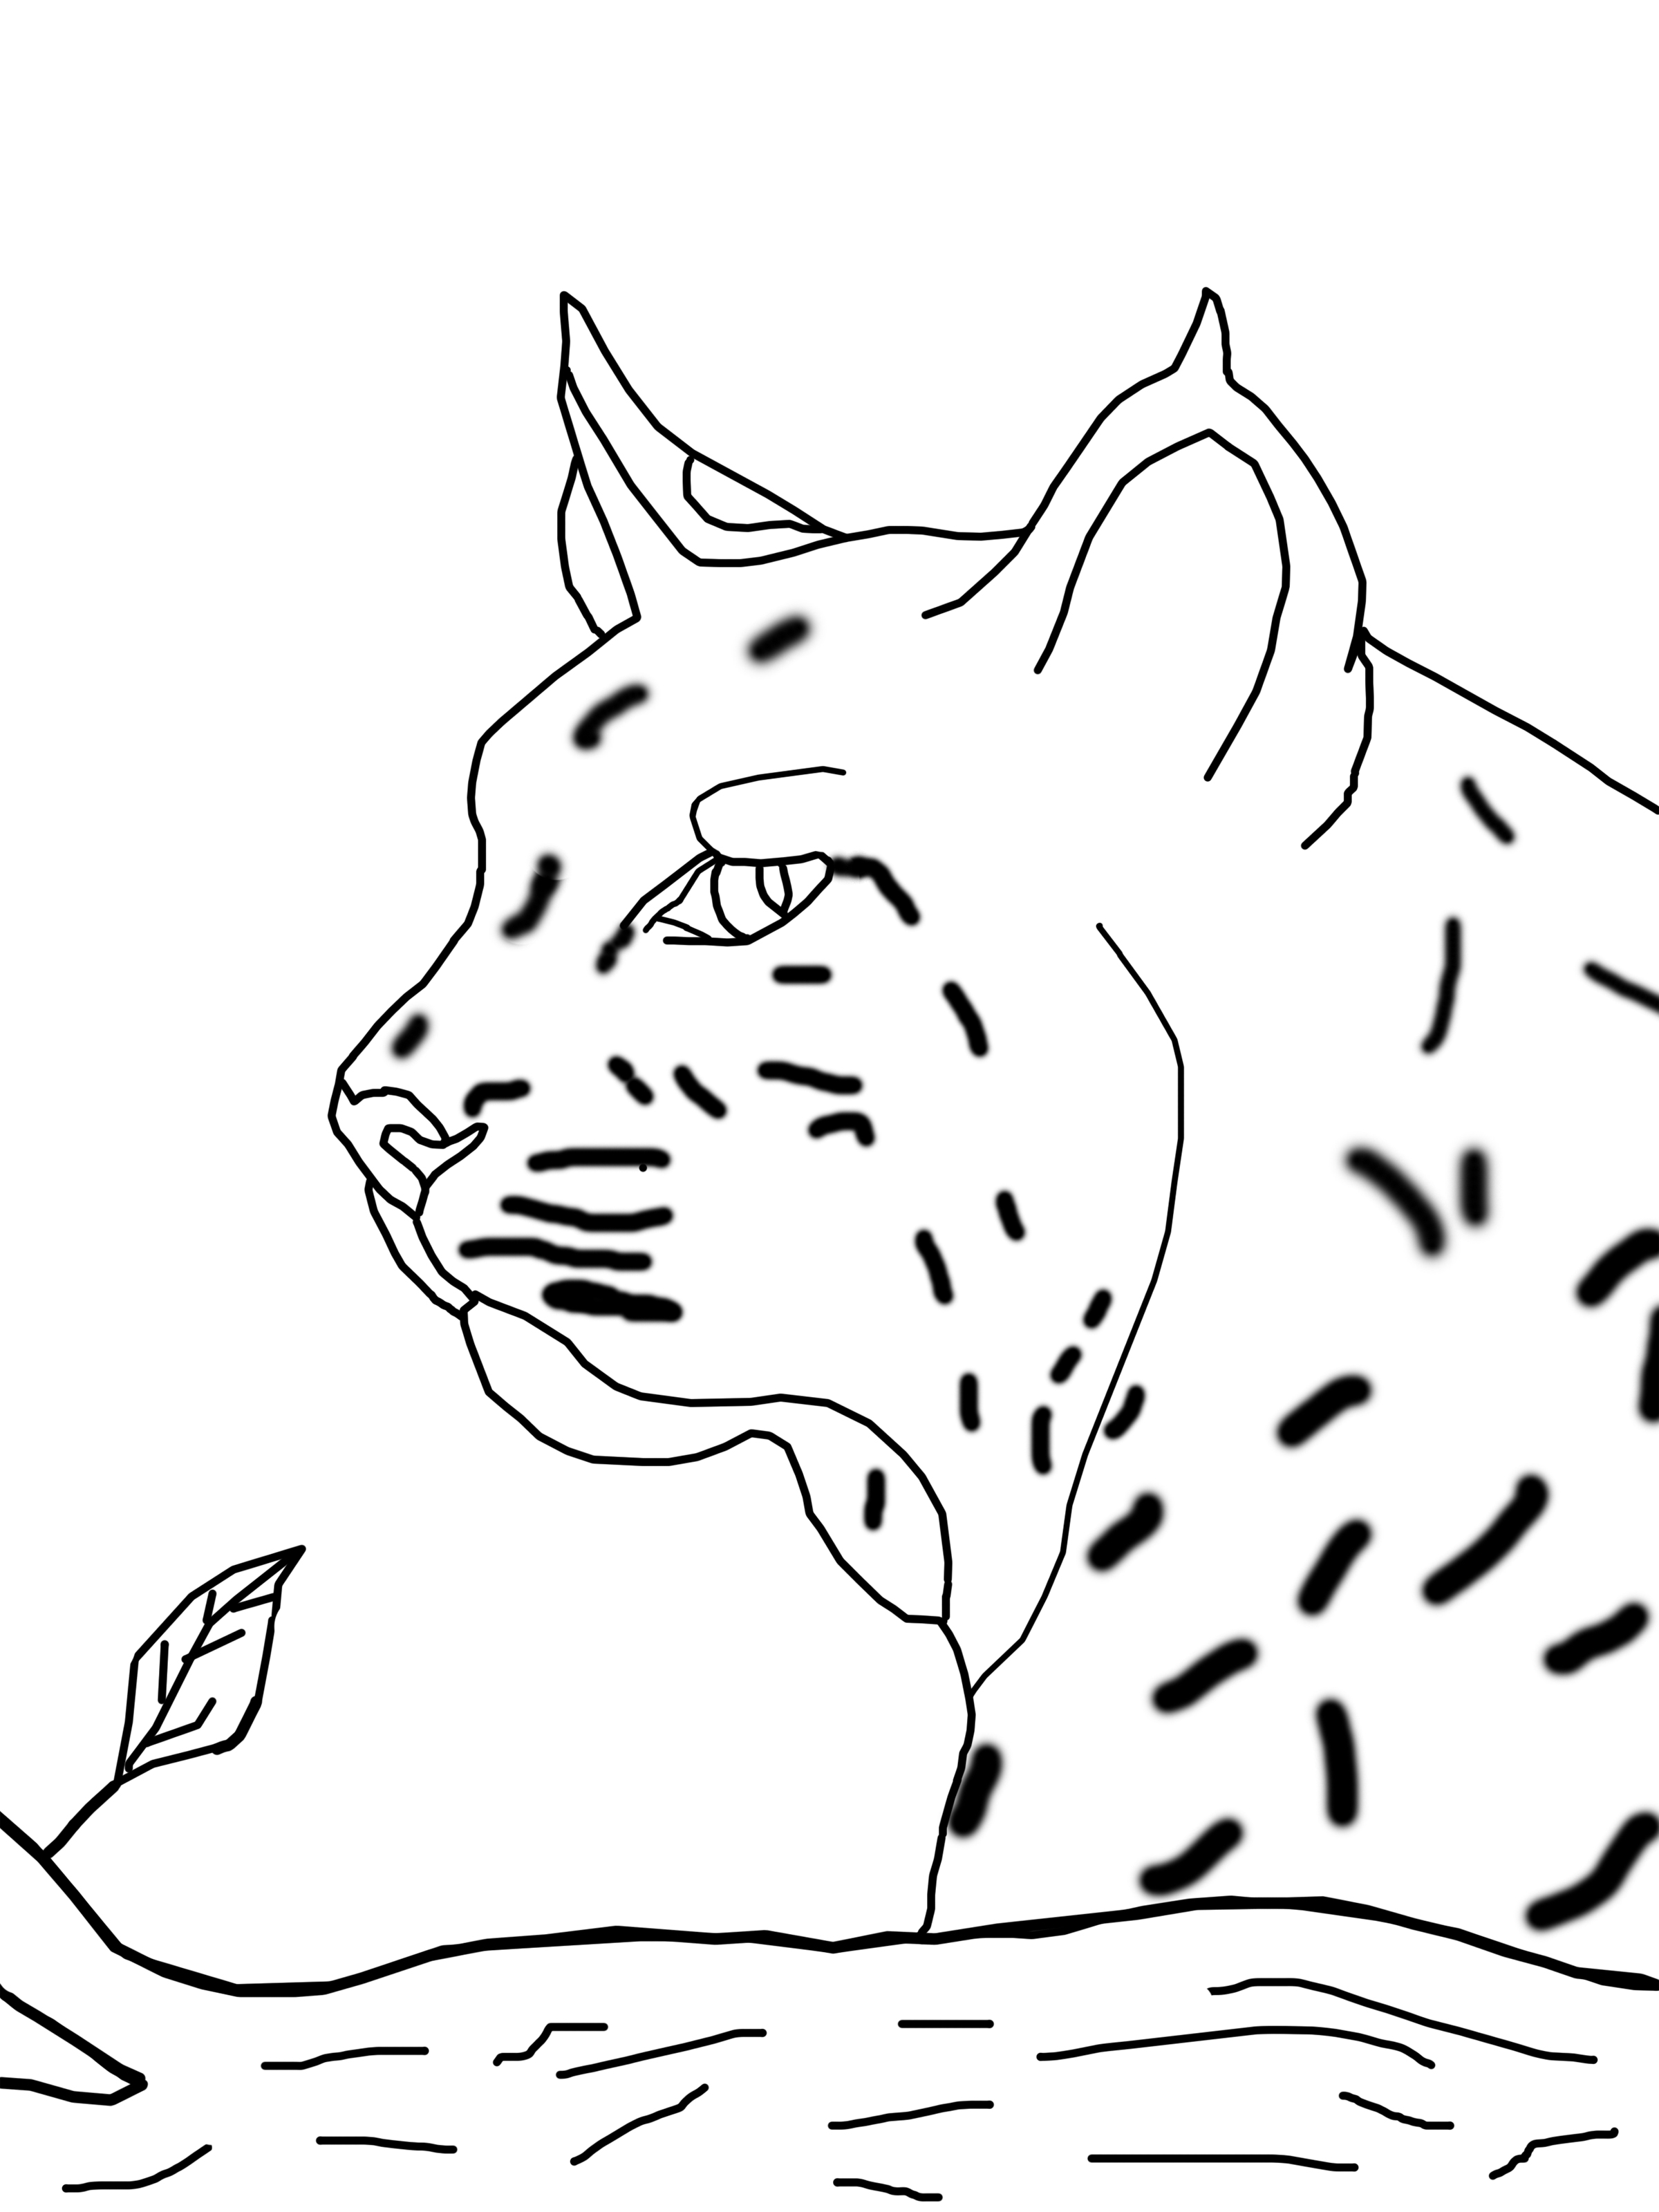 Bobcat coloring pages to download and print for free